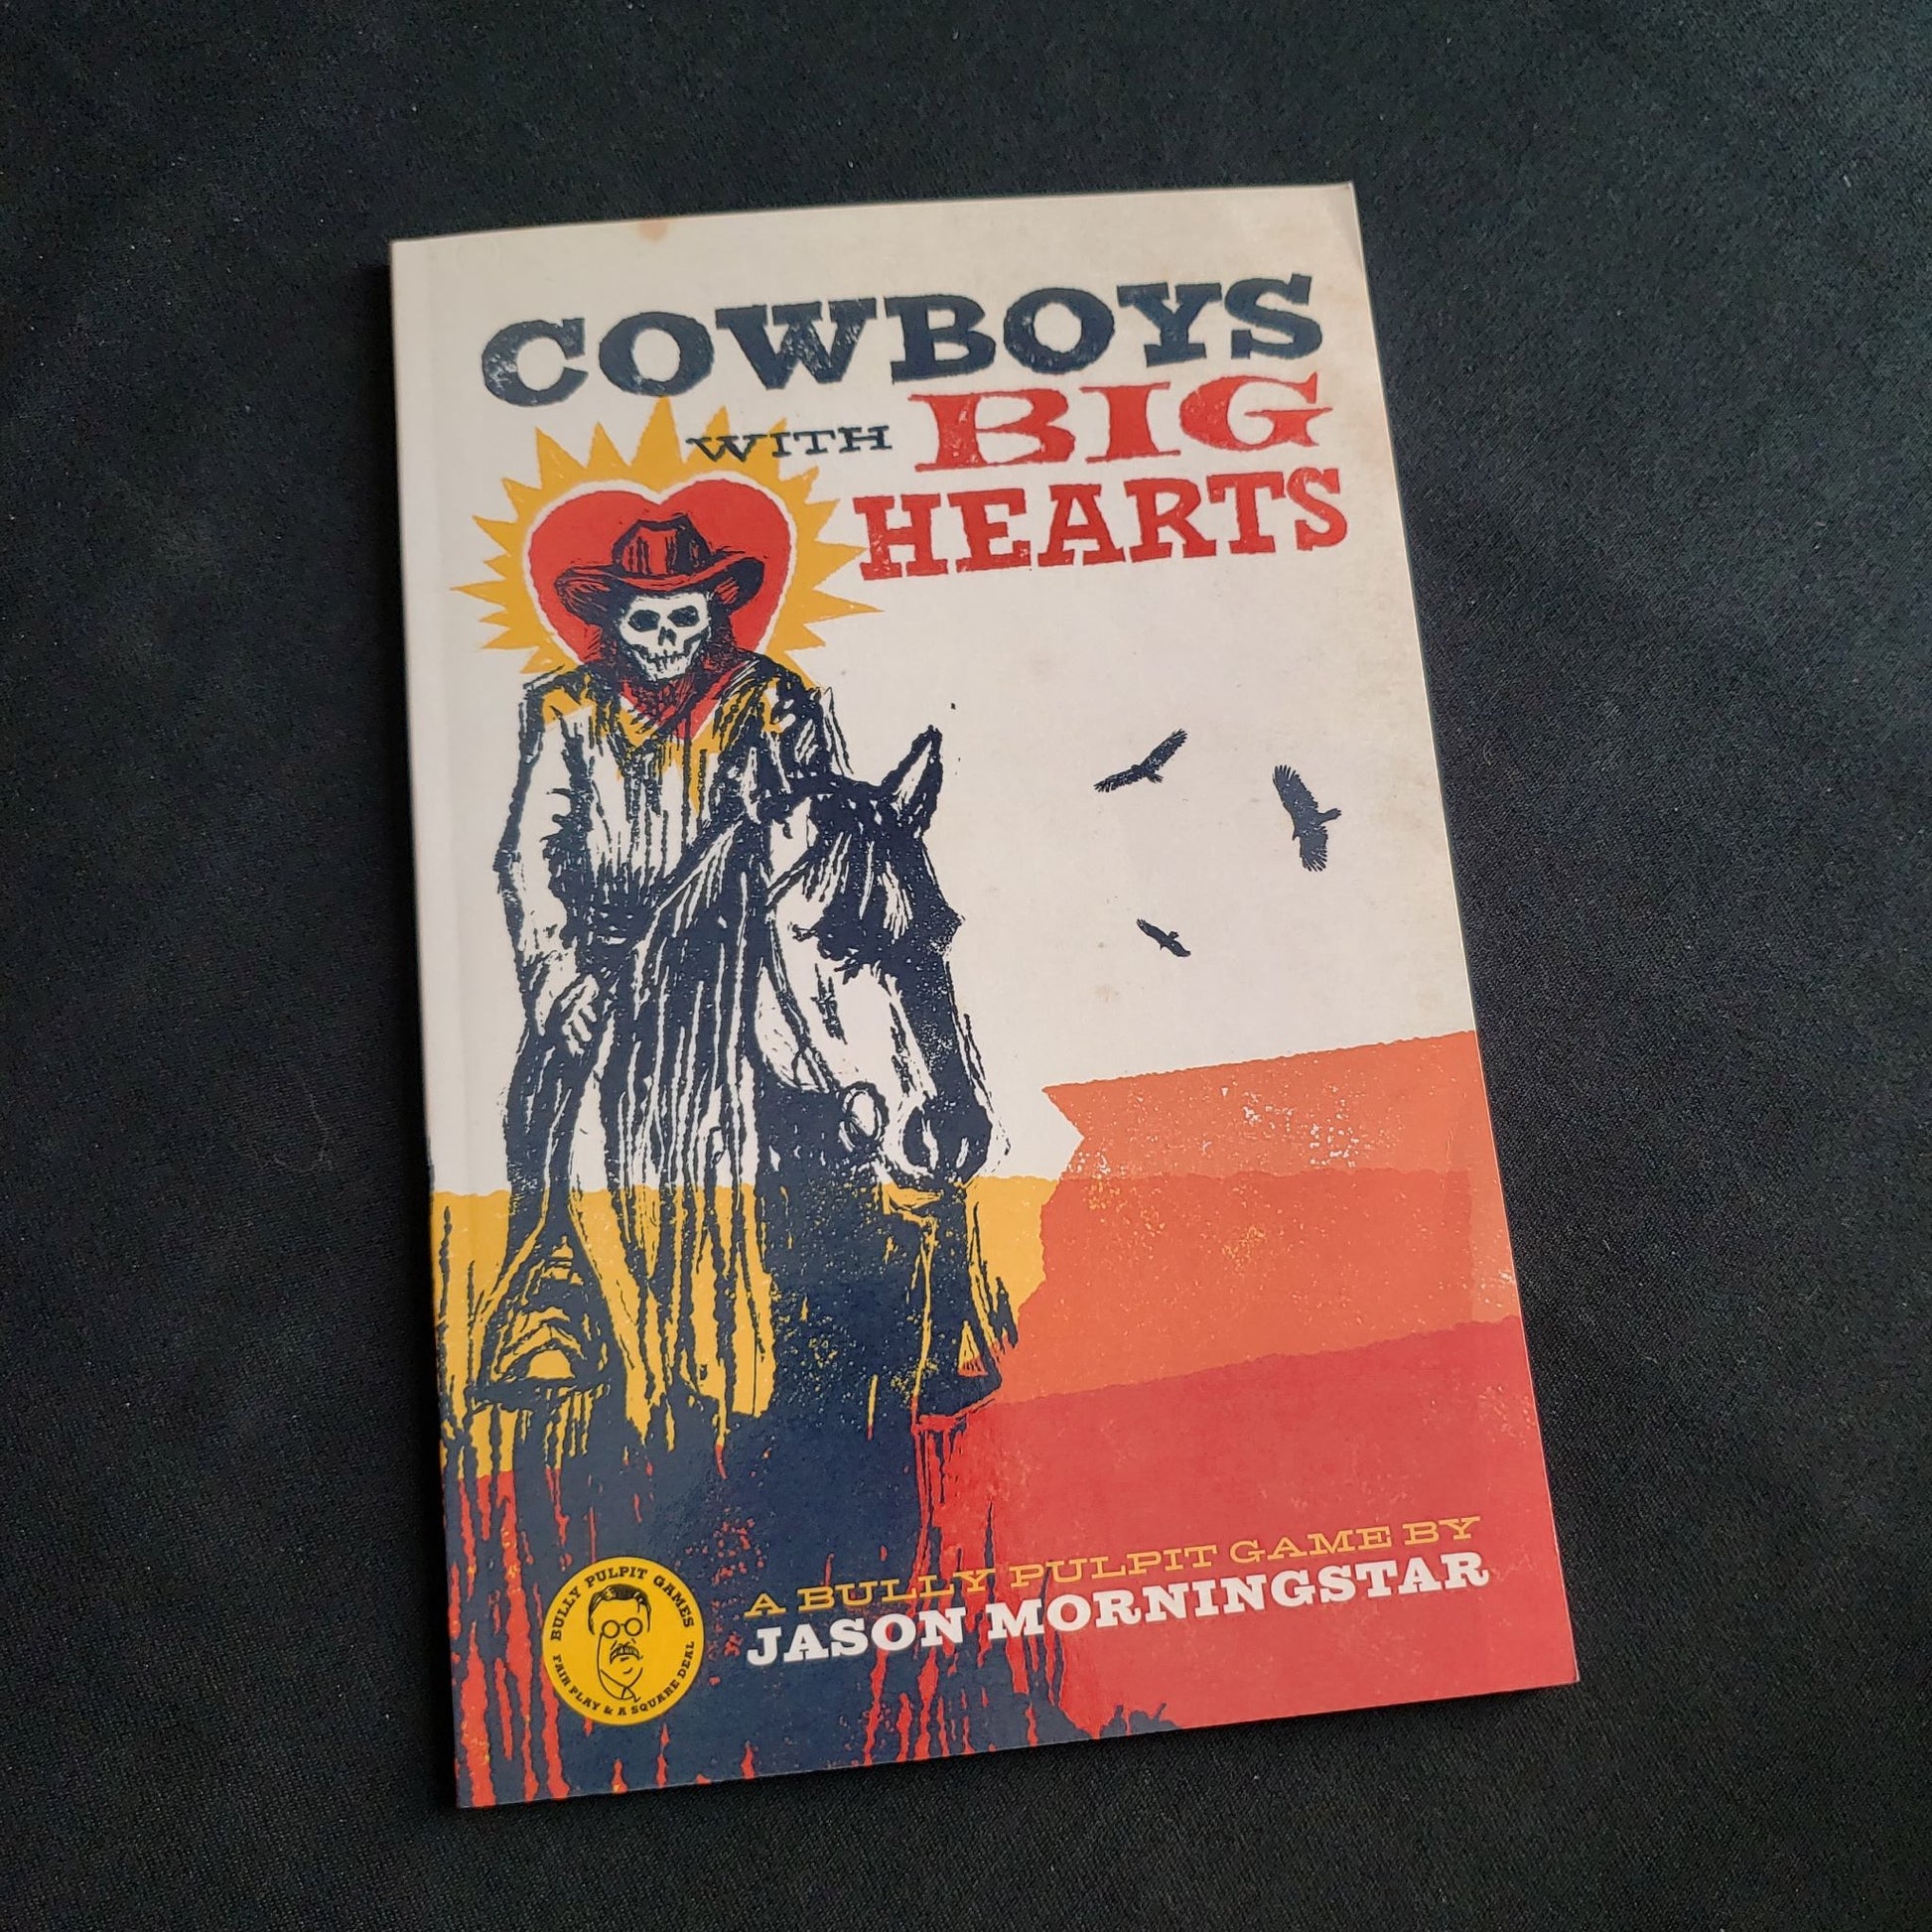 Image shows the front cover of the Cowboys With Big Hearts roleplaying game book